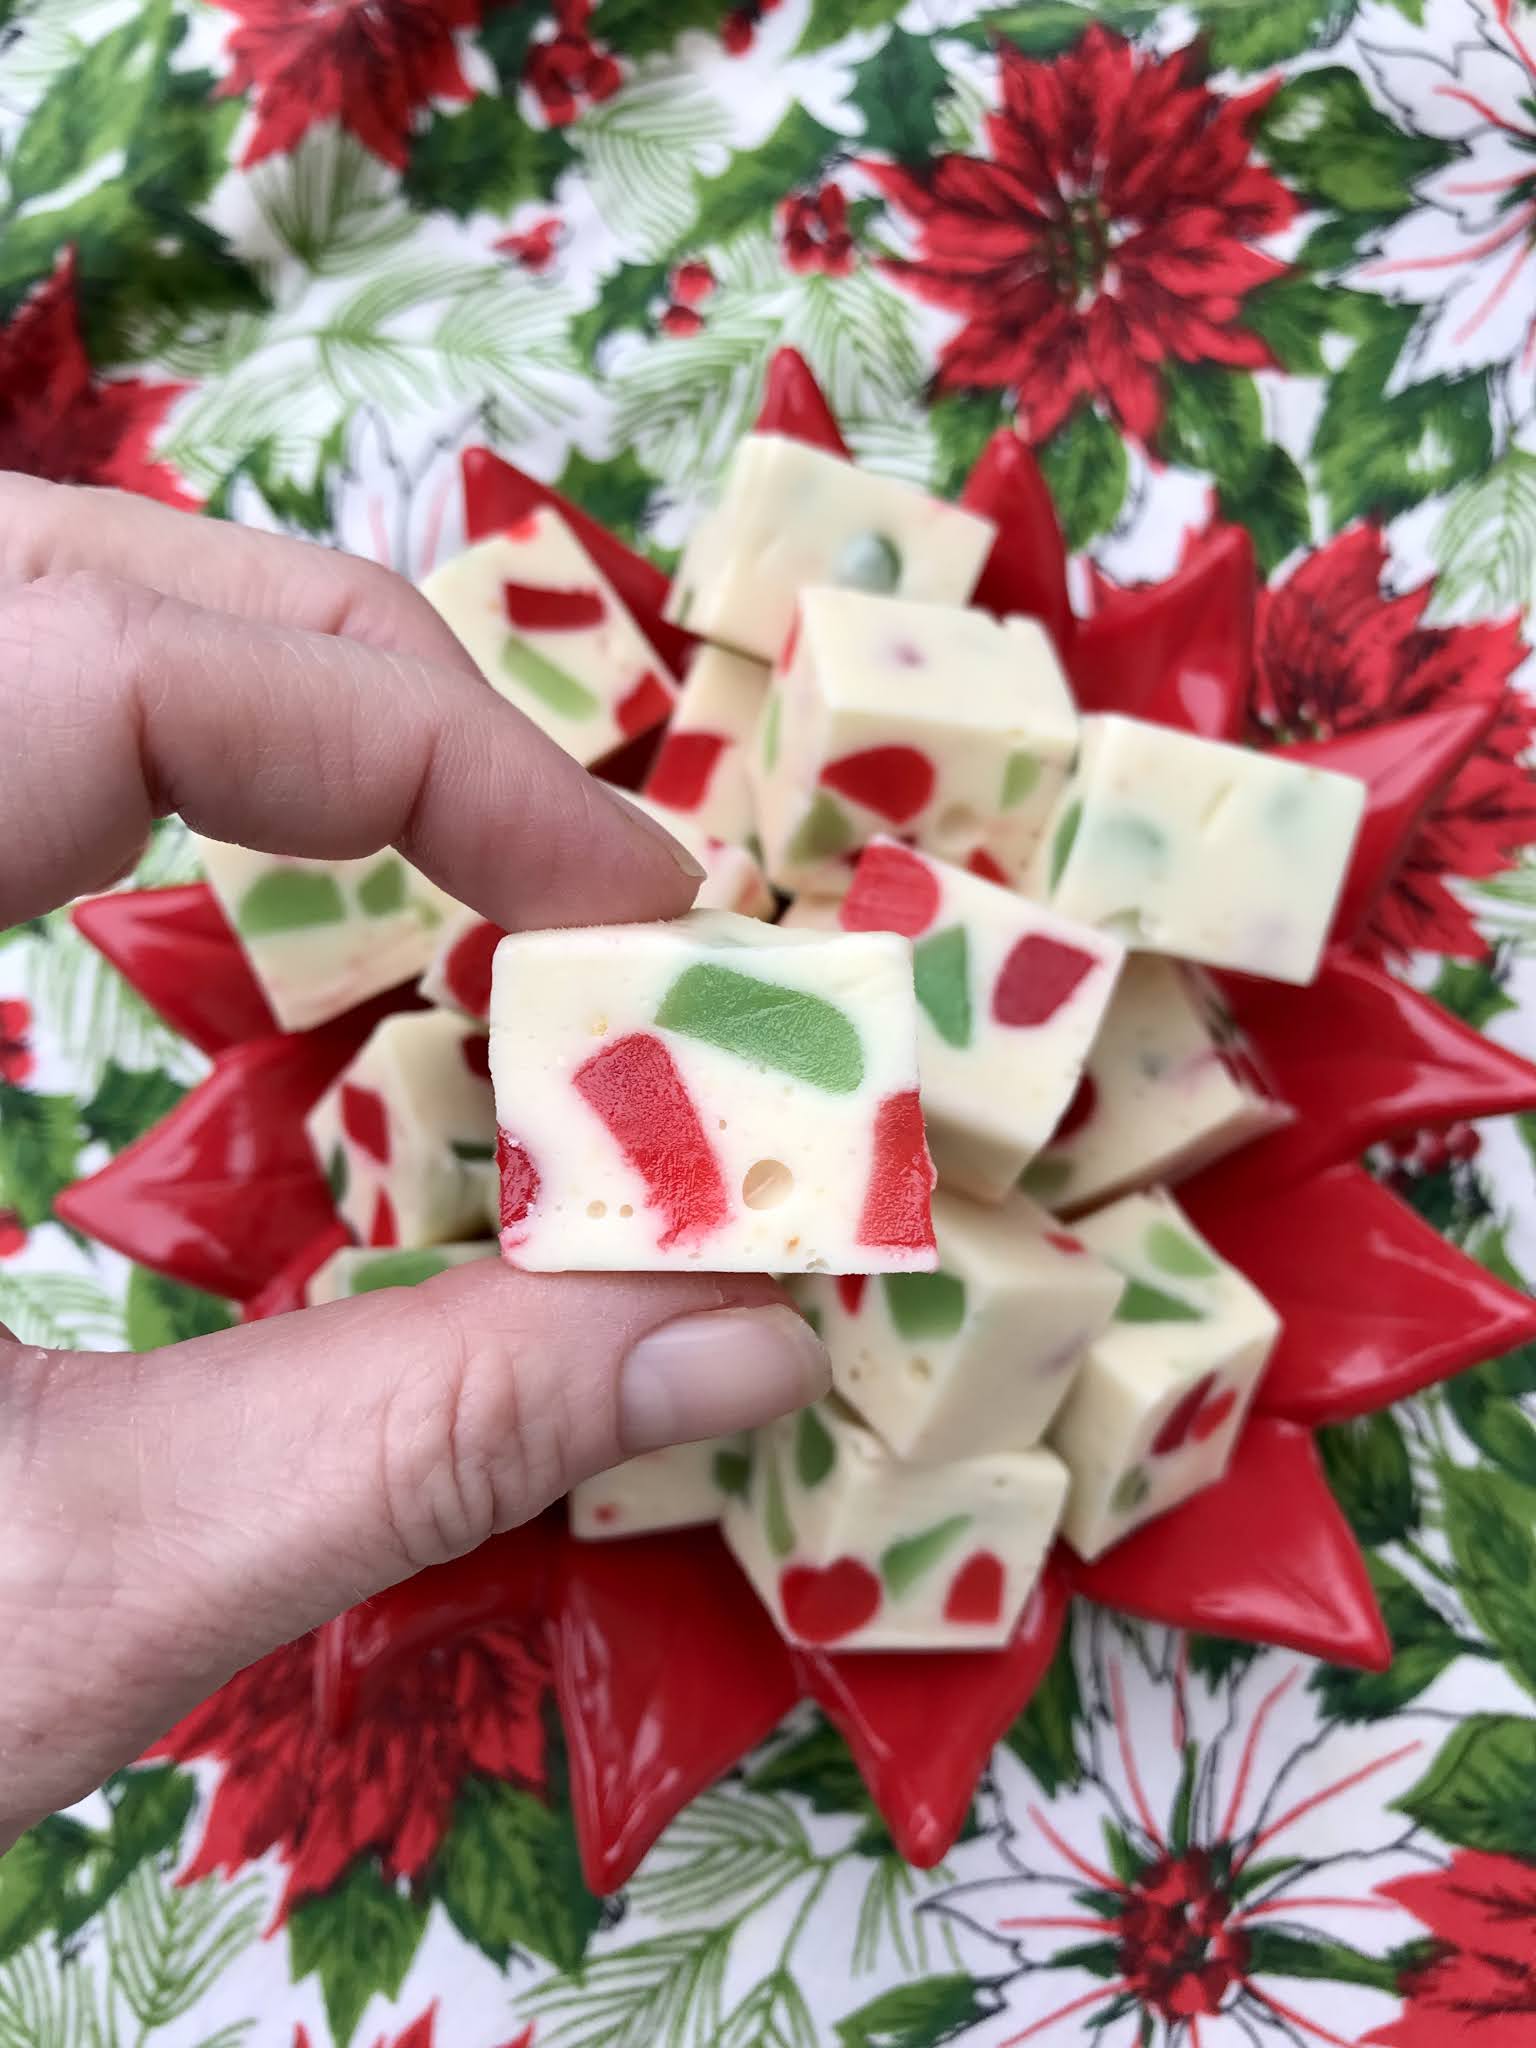 Easy Christmas Gumdrop Nougat Candy - A Pretty Life In The Suburbs